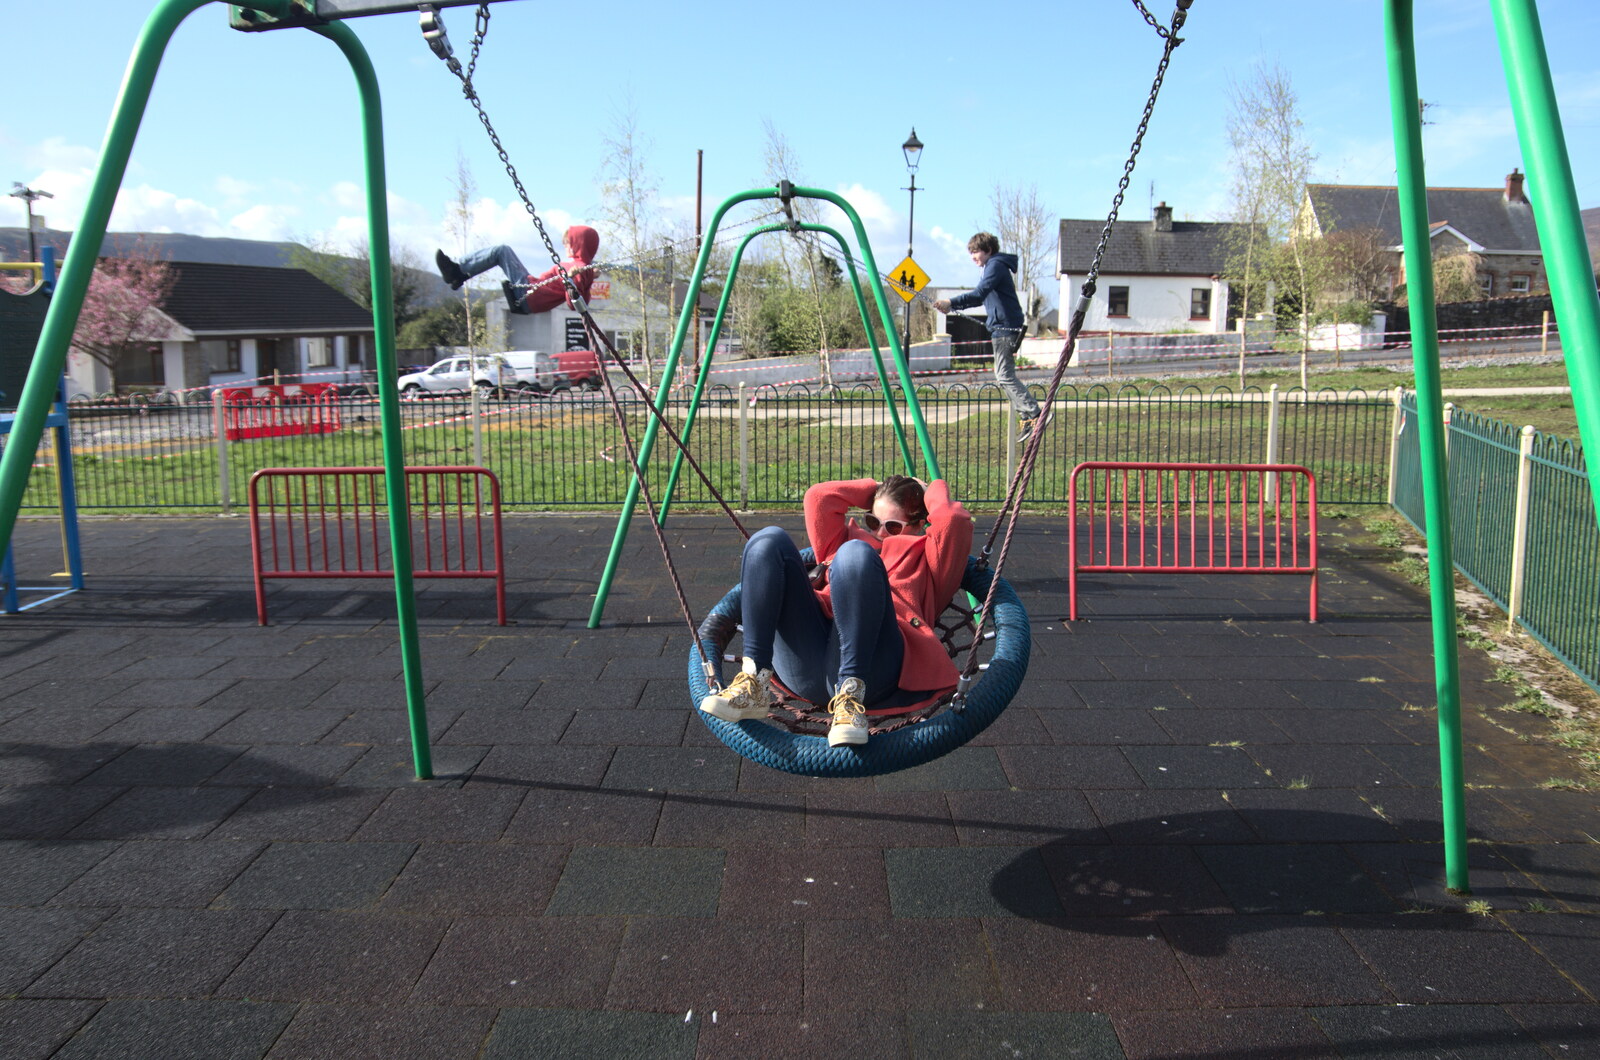 Isobel and the boys are in the playground from Manorhamilton and Bundoran, Leitrim and Donegal, Ireland - 16th April 2022